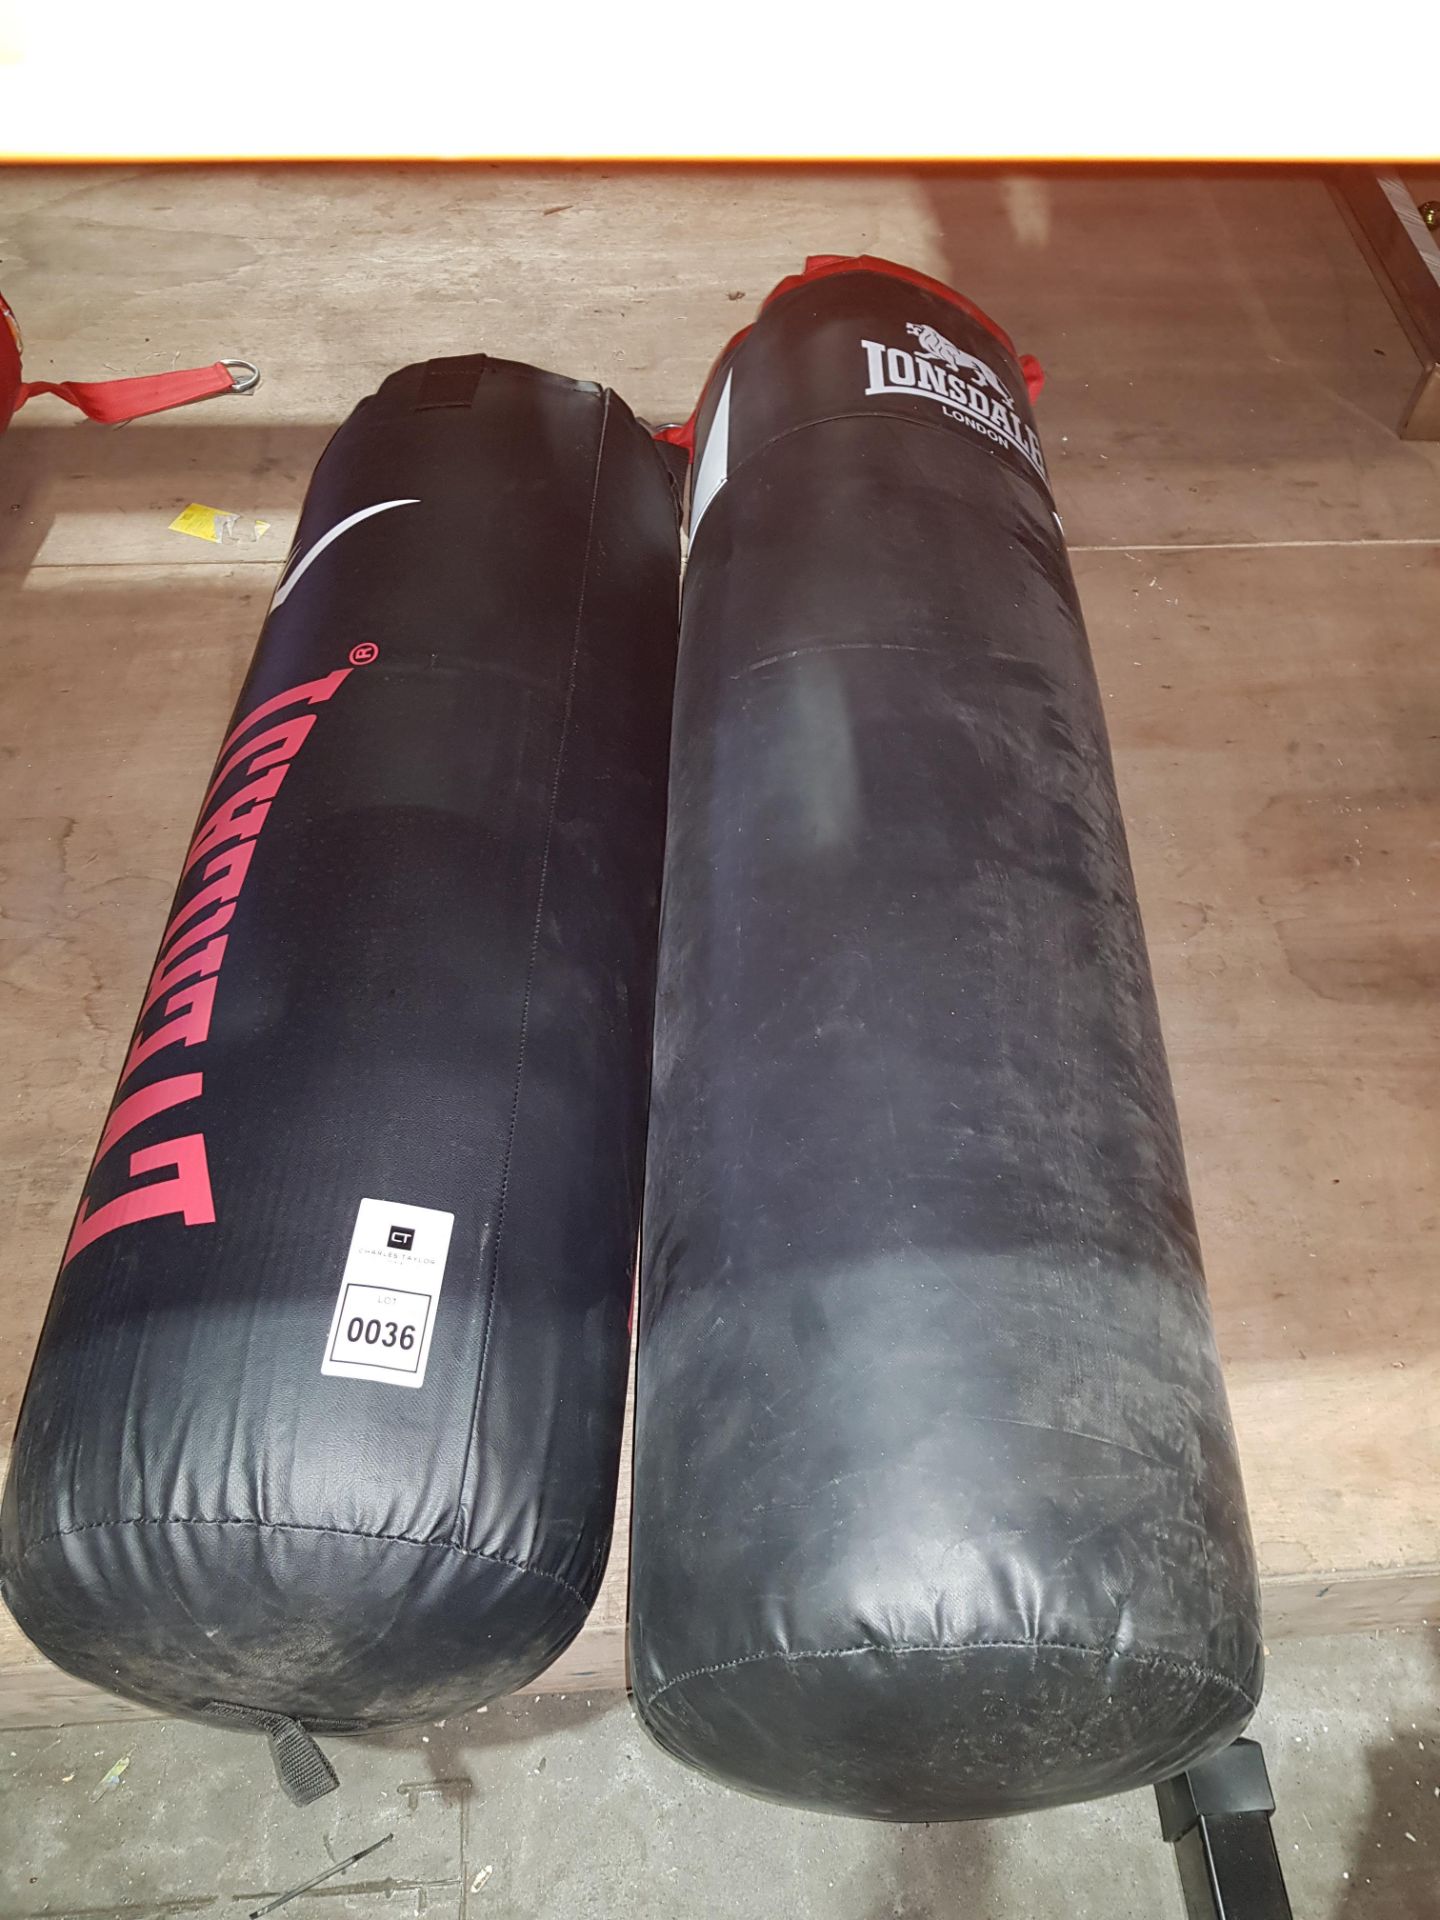 1 X LONSDALE 4 FT LEATHER PUNCH BAG AND 1 X EVERLAST 3 AND HALF FT LEATHER PUNCH BAG